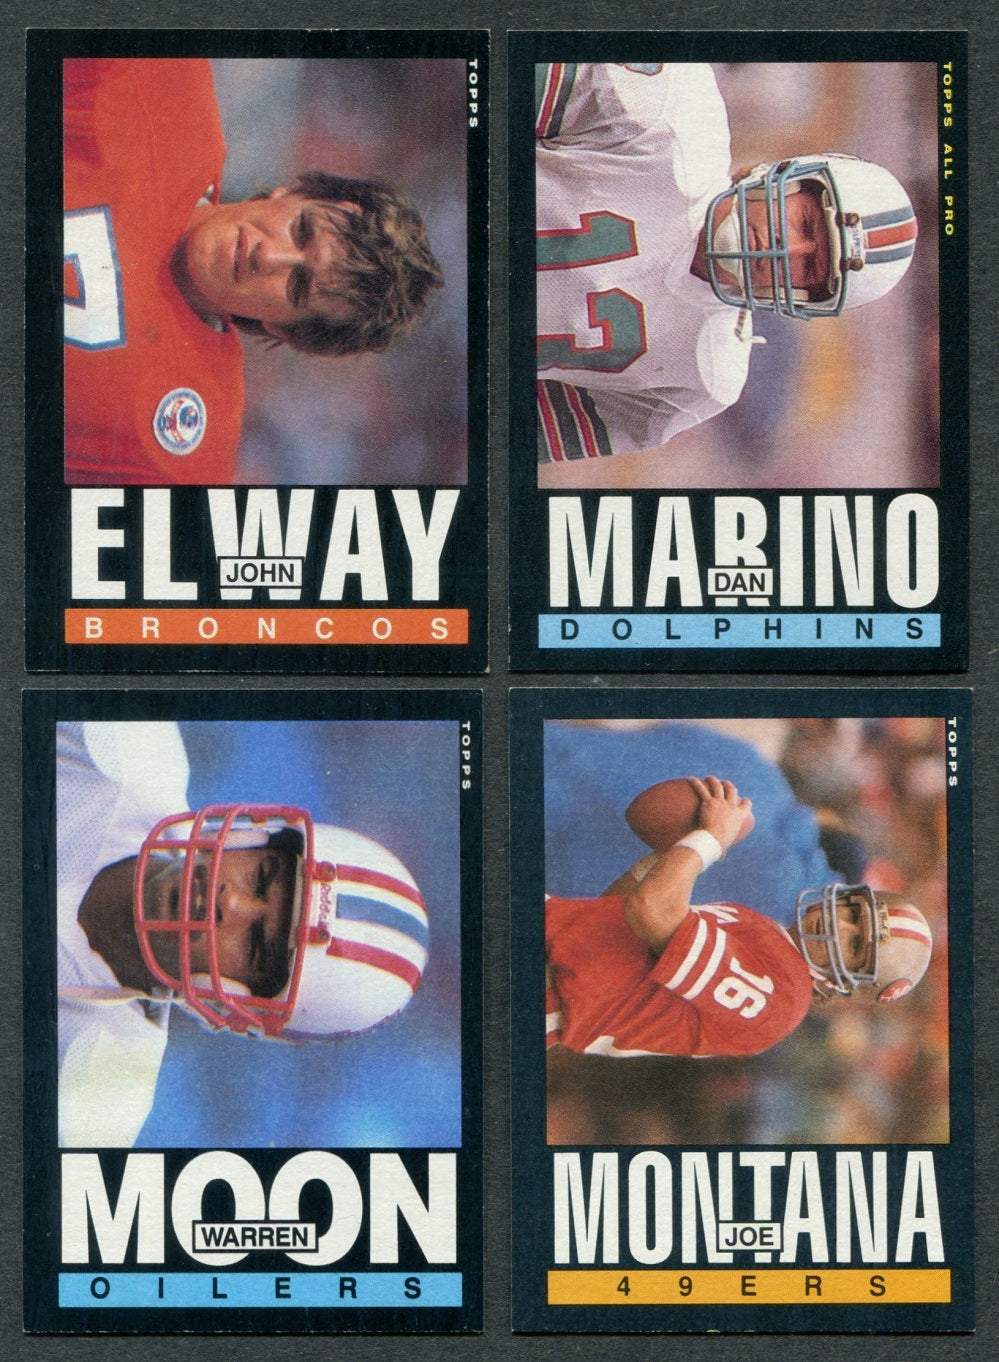 1985 Topps Football Complete Set NM (396) (24-481)